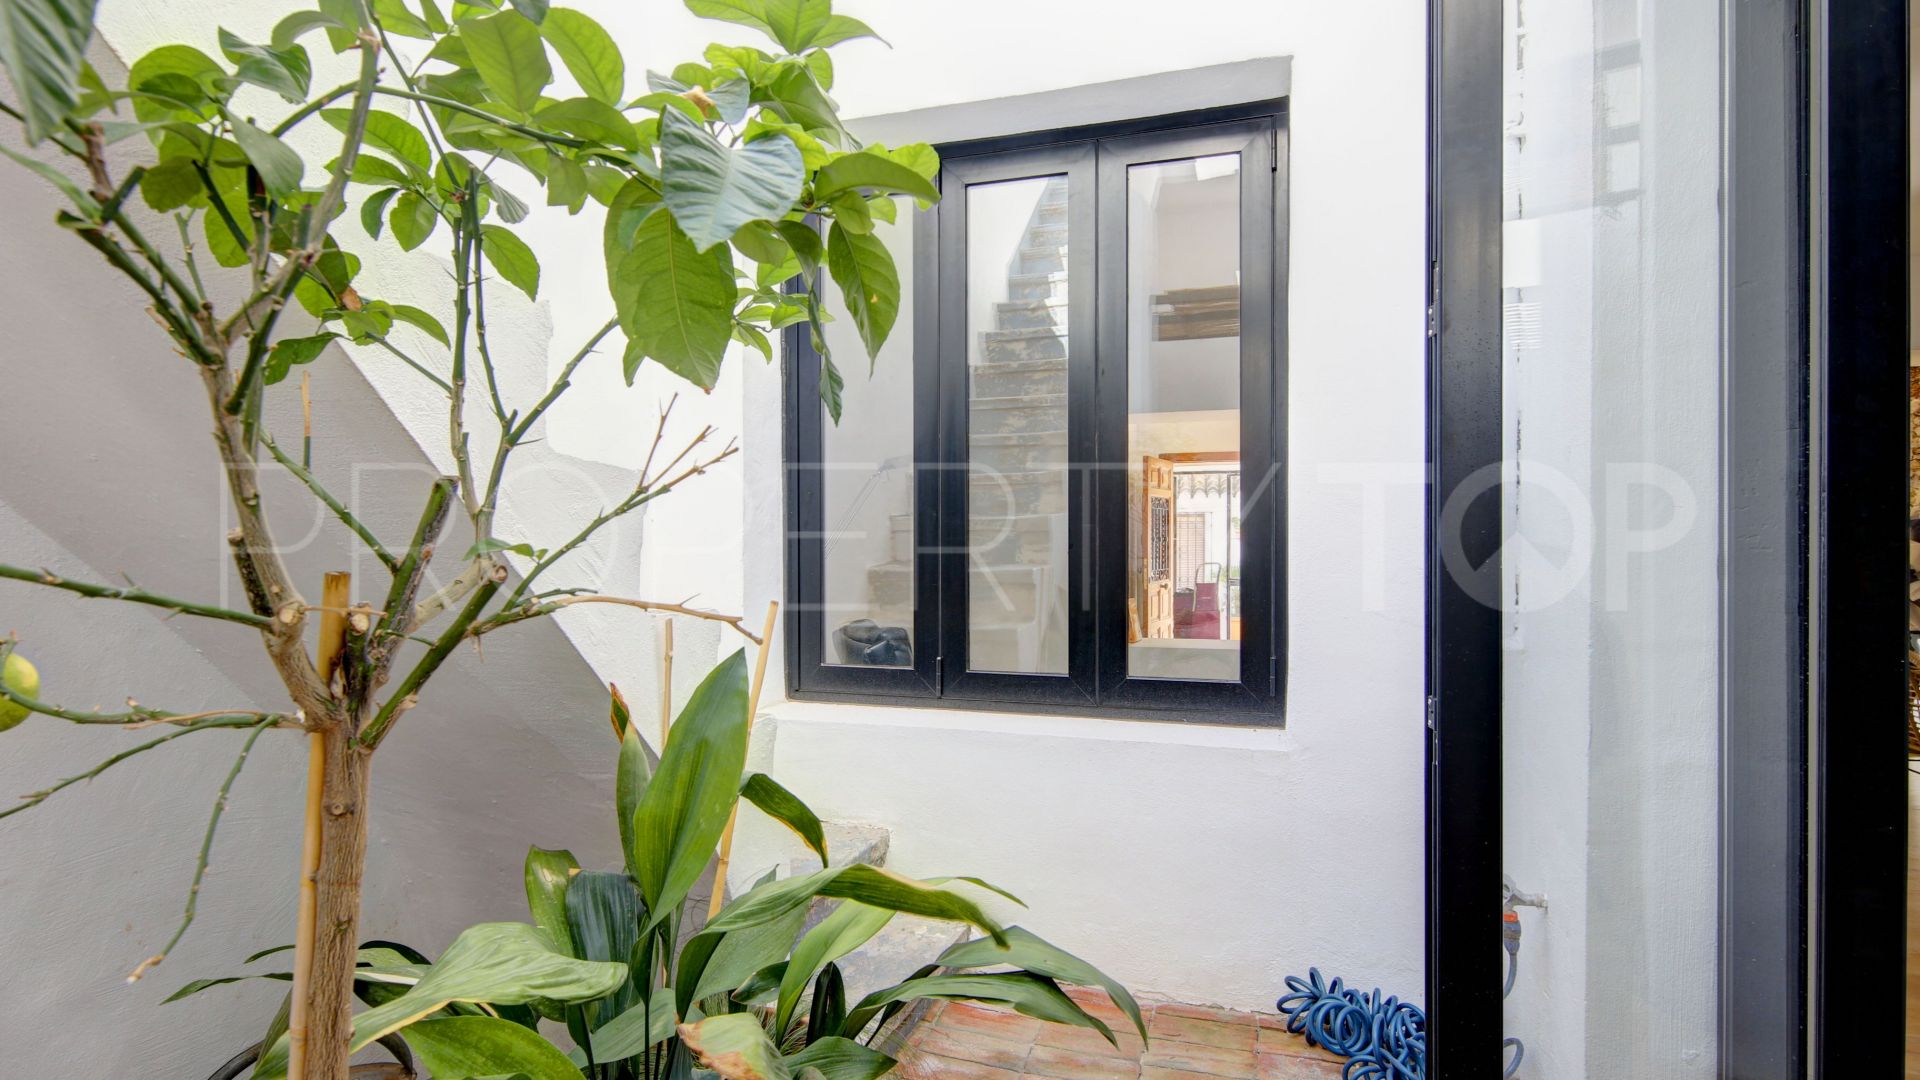 For sale Estepona Old Town ground floor apartment with 1 bedroom